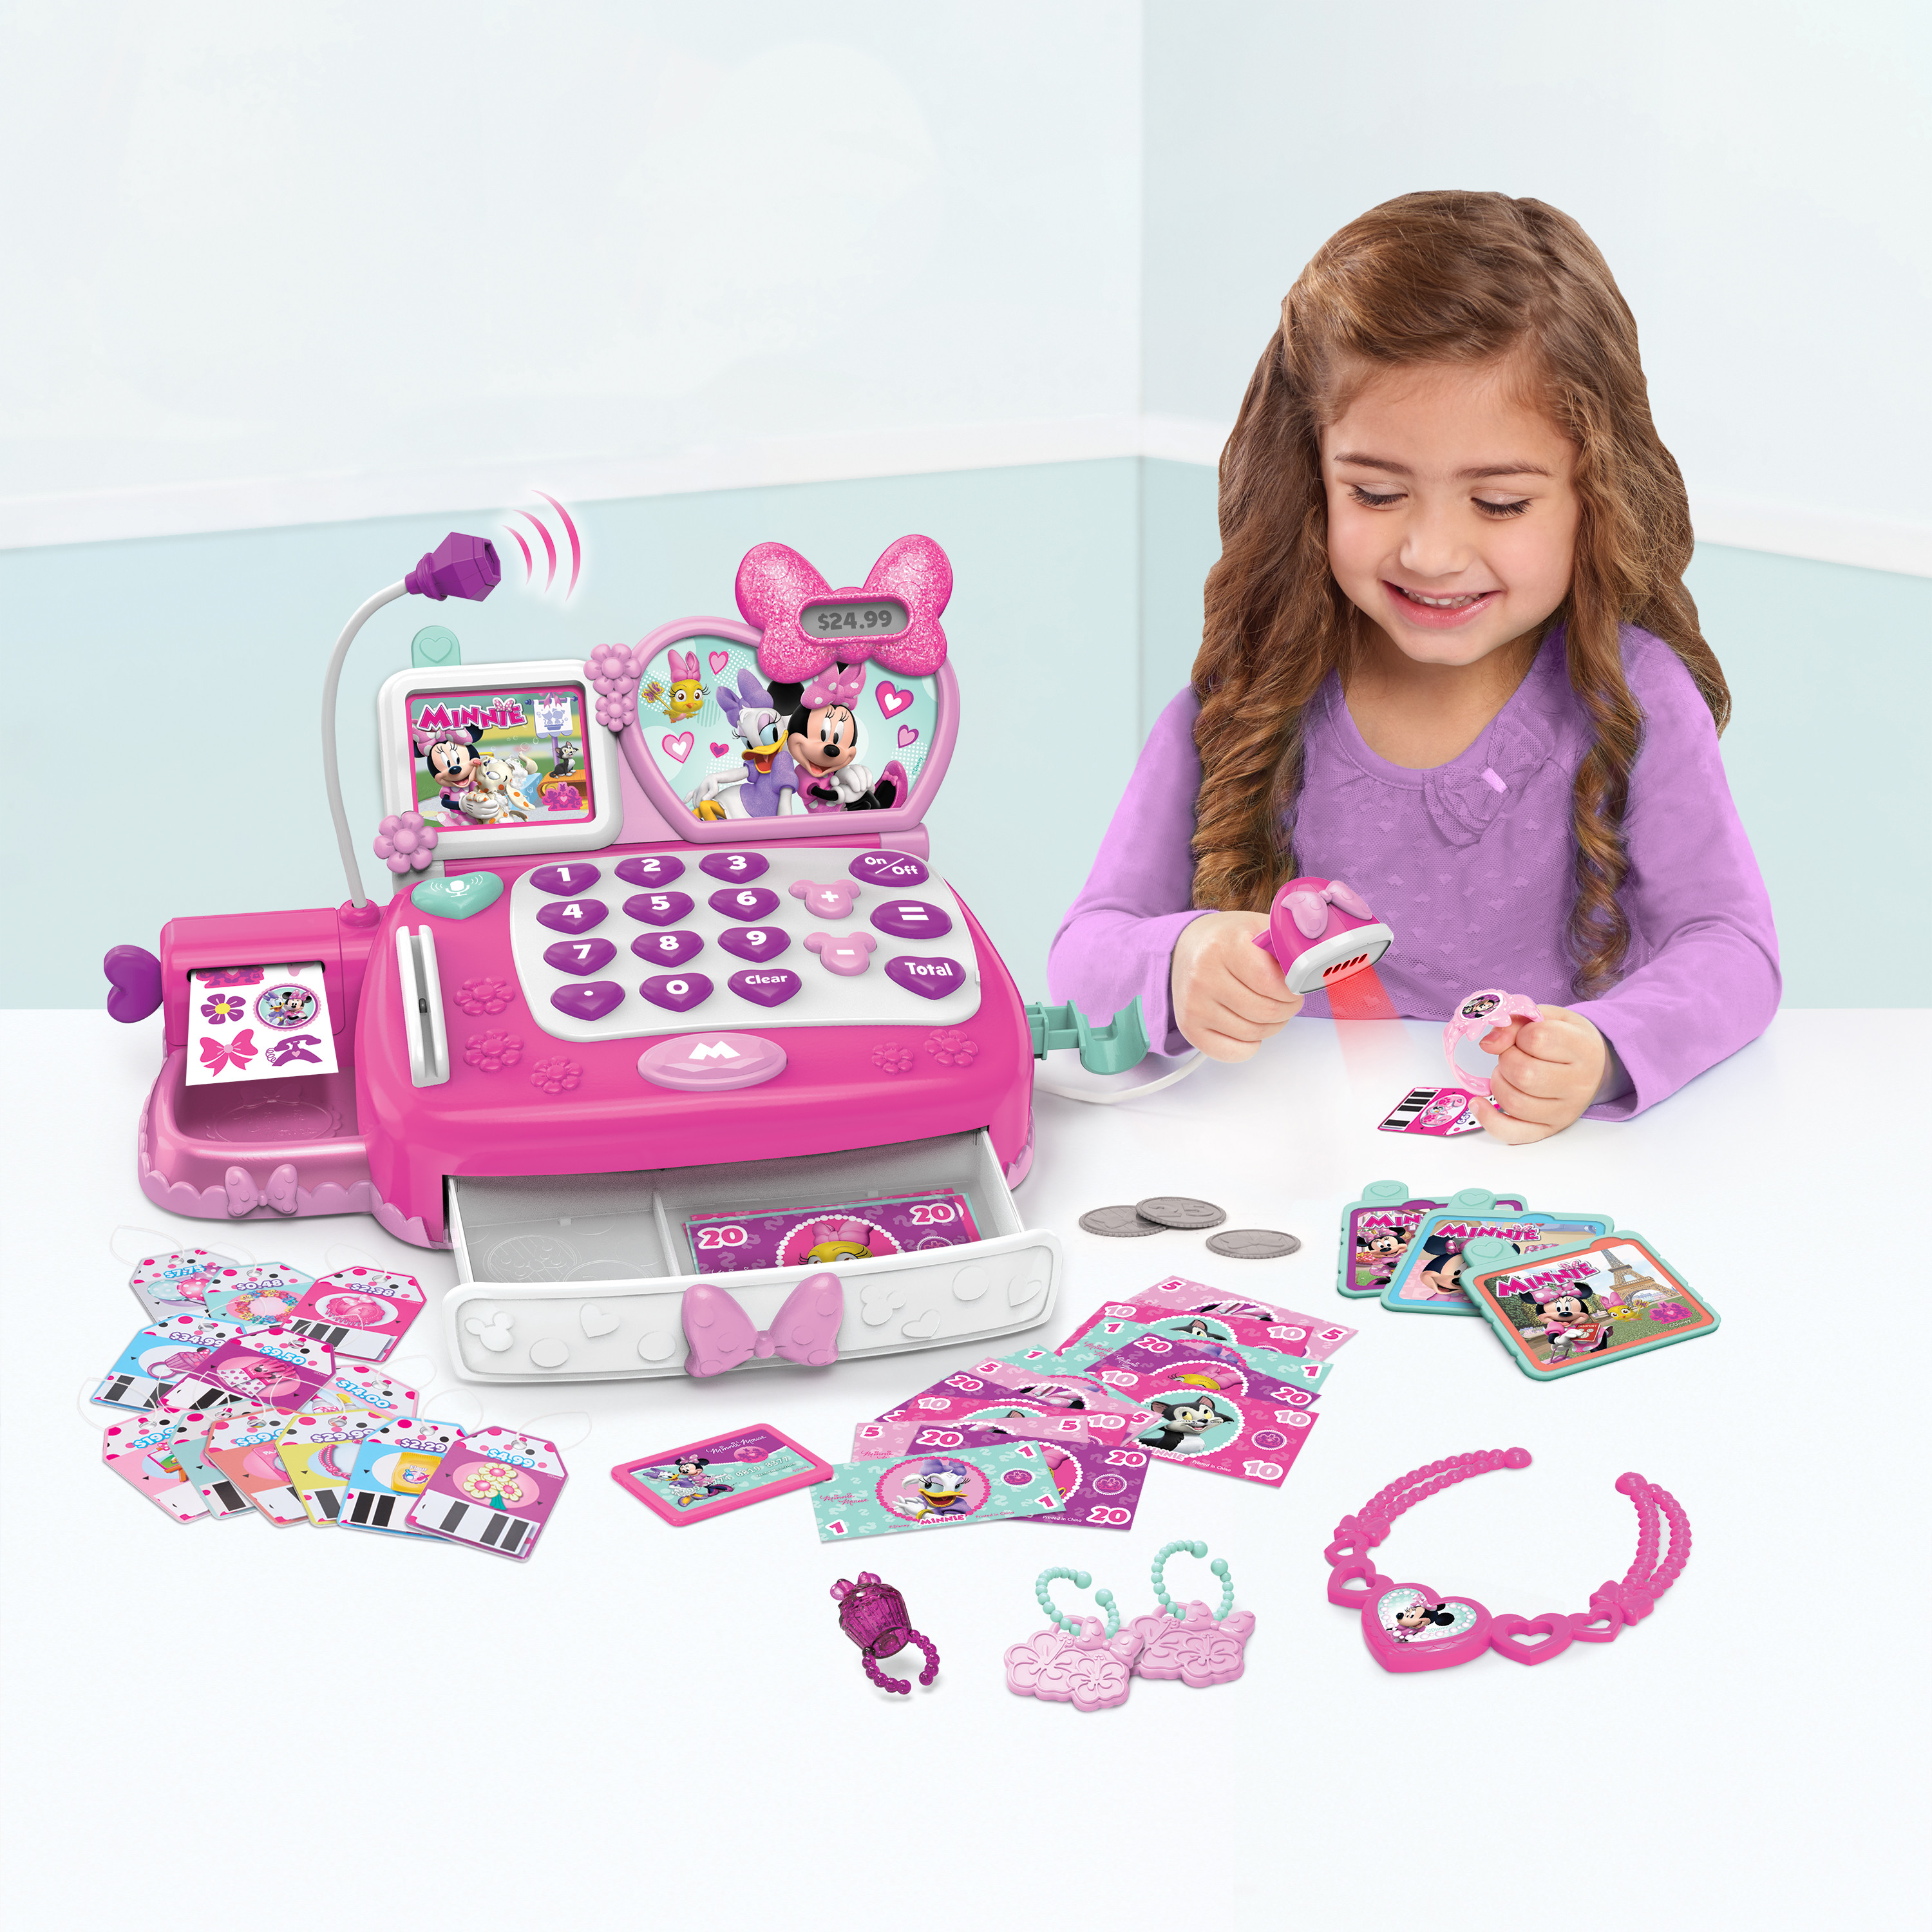 Minnie's Happy Helpers Shop N' Scan Talking Cash Register, Role Play, Ages 3 Up, by Just Play - image 3 of 7